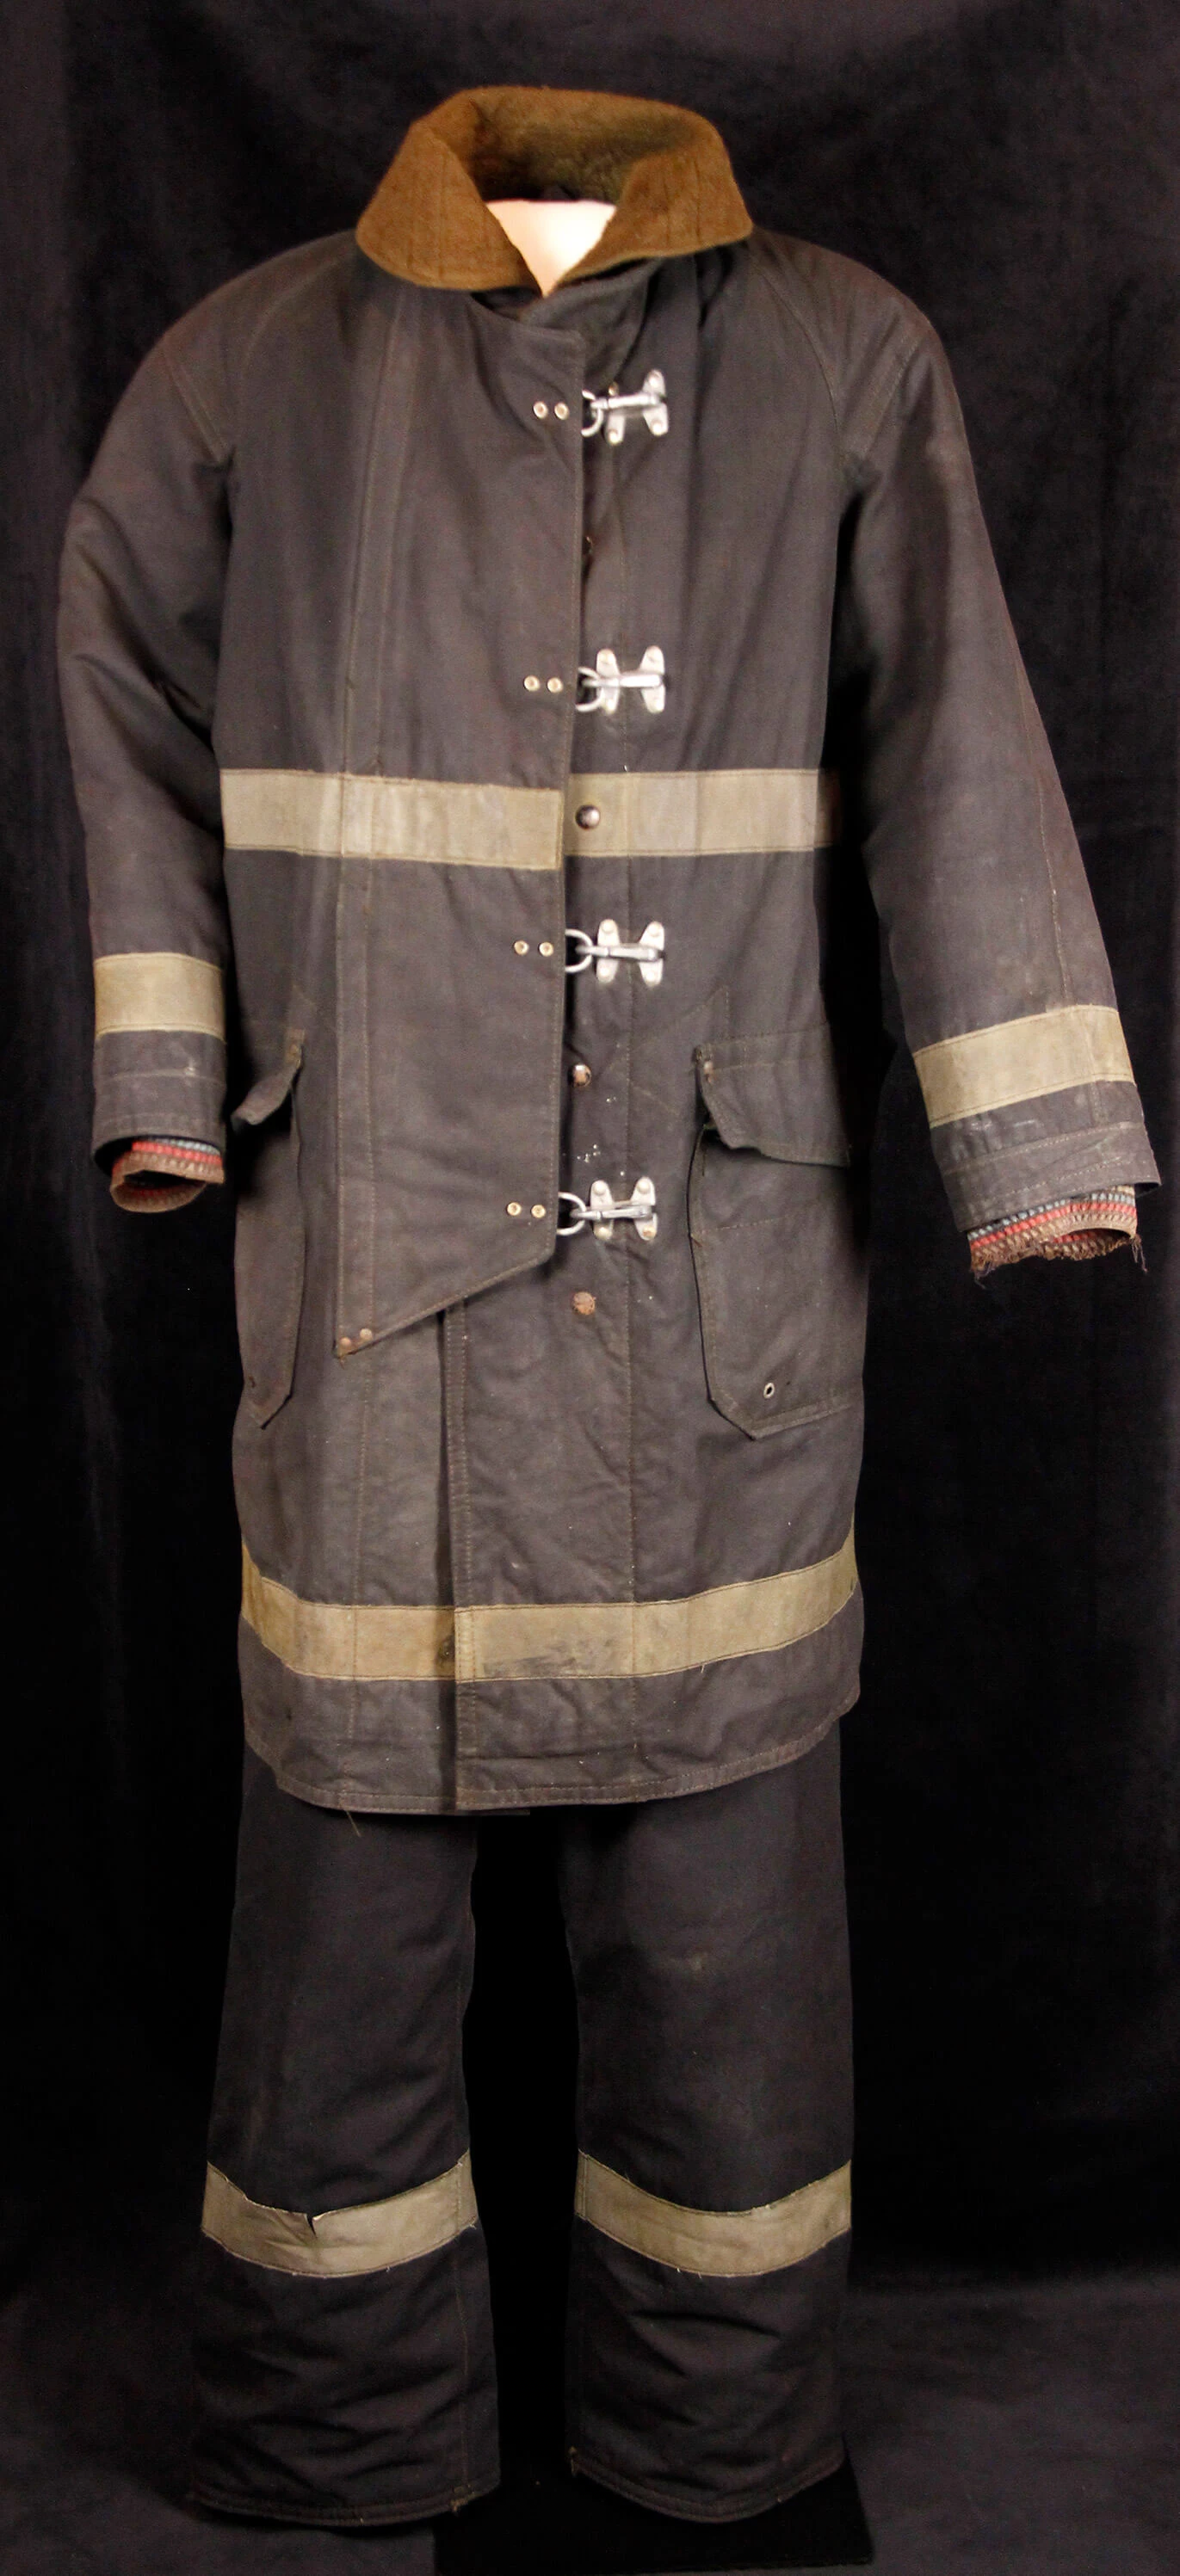 Black uniform with yellow stripe. Coat is long sleeved and goes to the middle thigh, and has large metal buckles to close it.